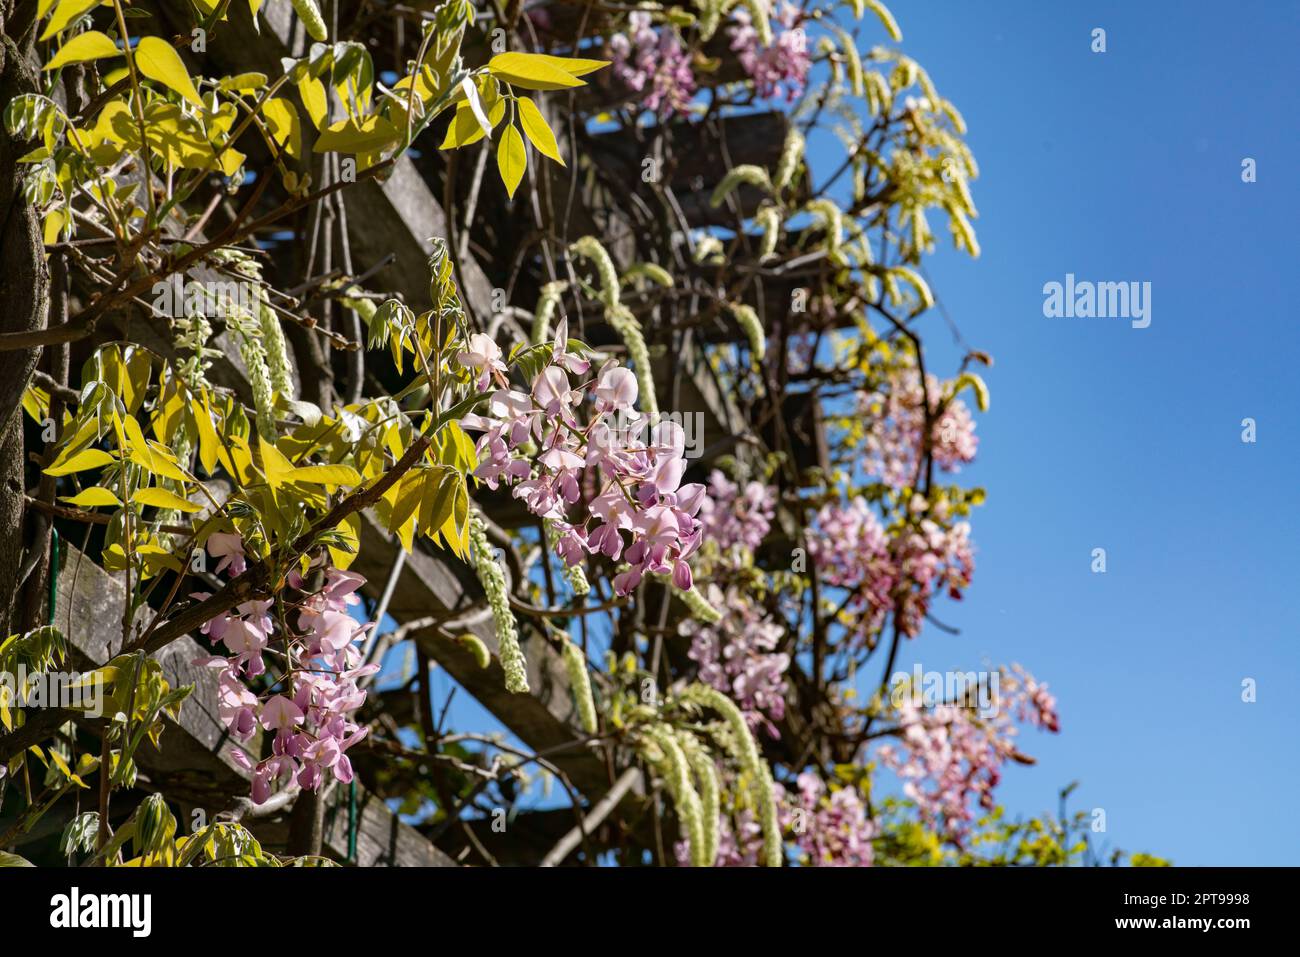 In spring the wisteria blooms, the pink-petaled flowers descend in clusters from the pergola into the flower garden. It creates a flowery background. Stock Photo